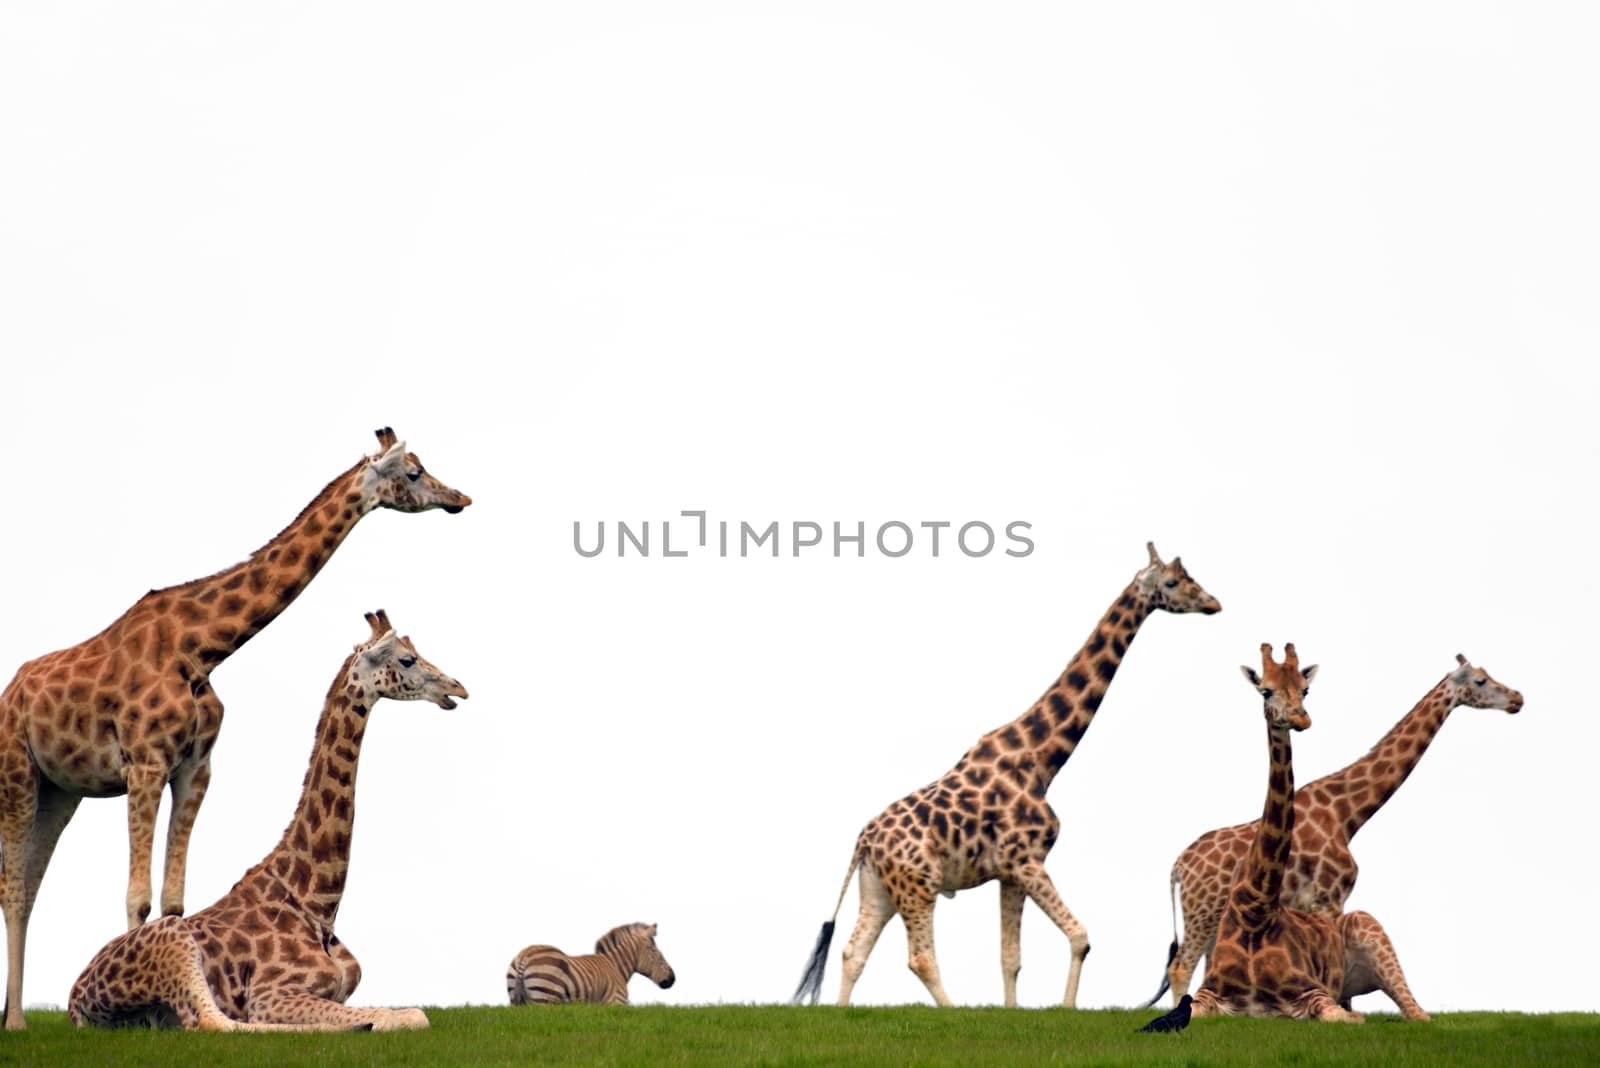 zebra and giraffes resting in the grass by morrbyte